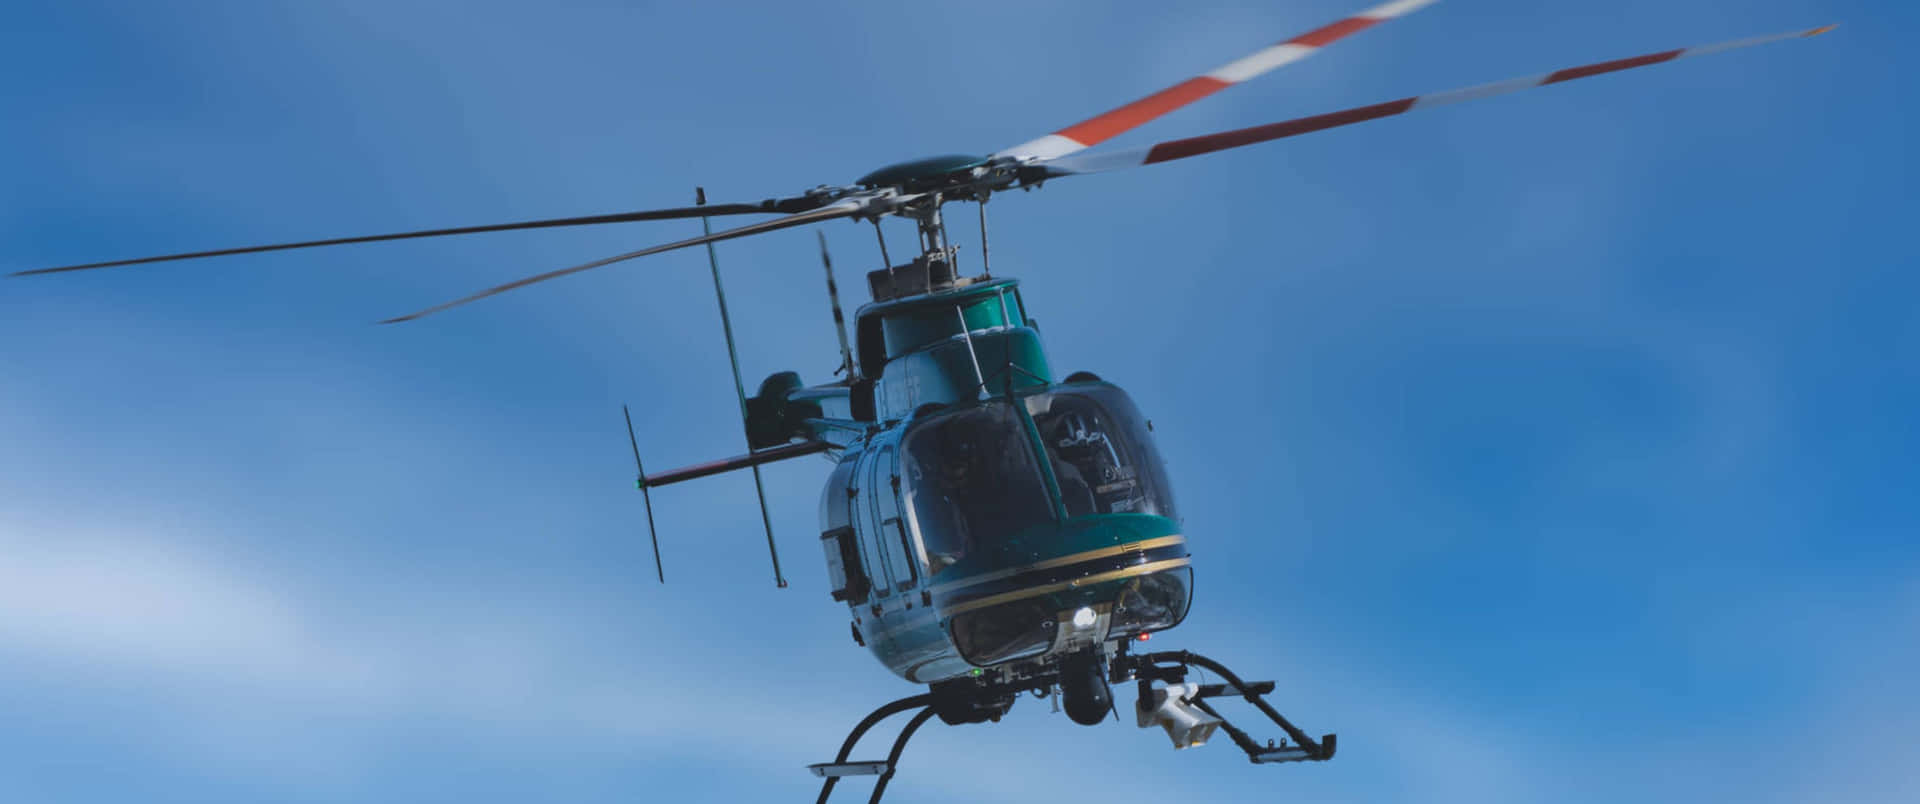 A Helicopter Flying In The Sky With A Green And Blue Color